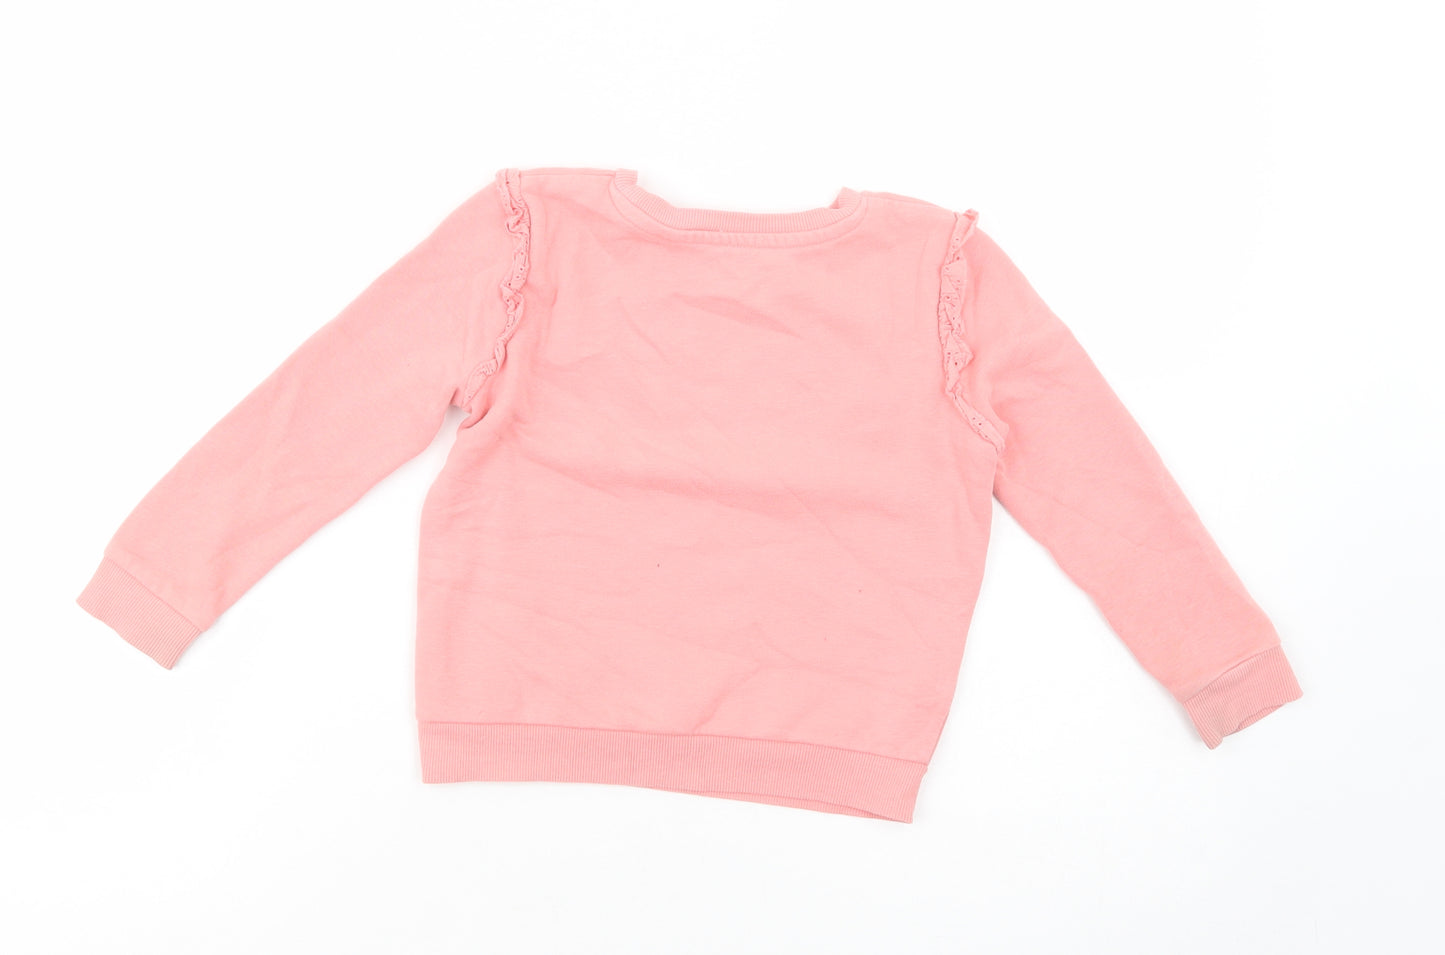 George Girls Pink  Cotton Pullover Sweatshirt Size 4-5 Years  Pullover - Happy Heart